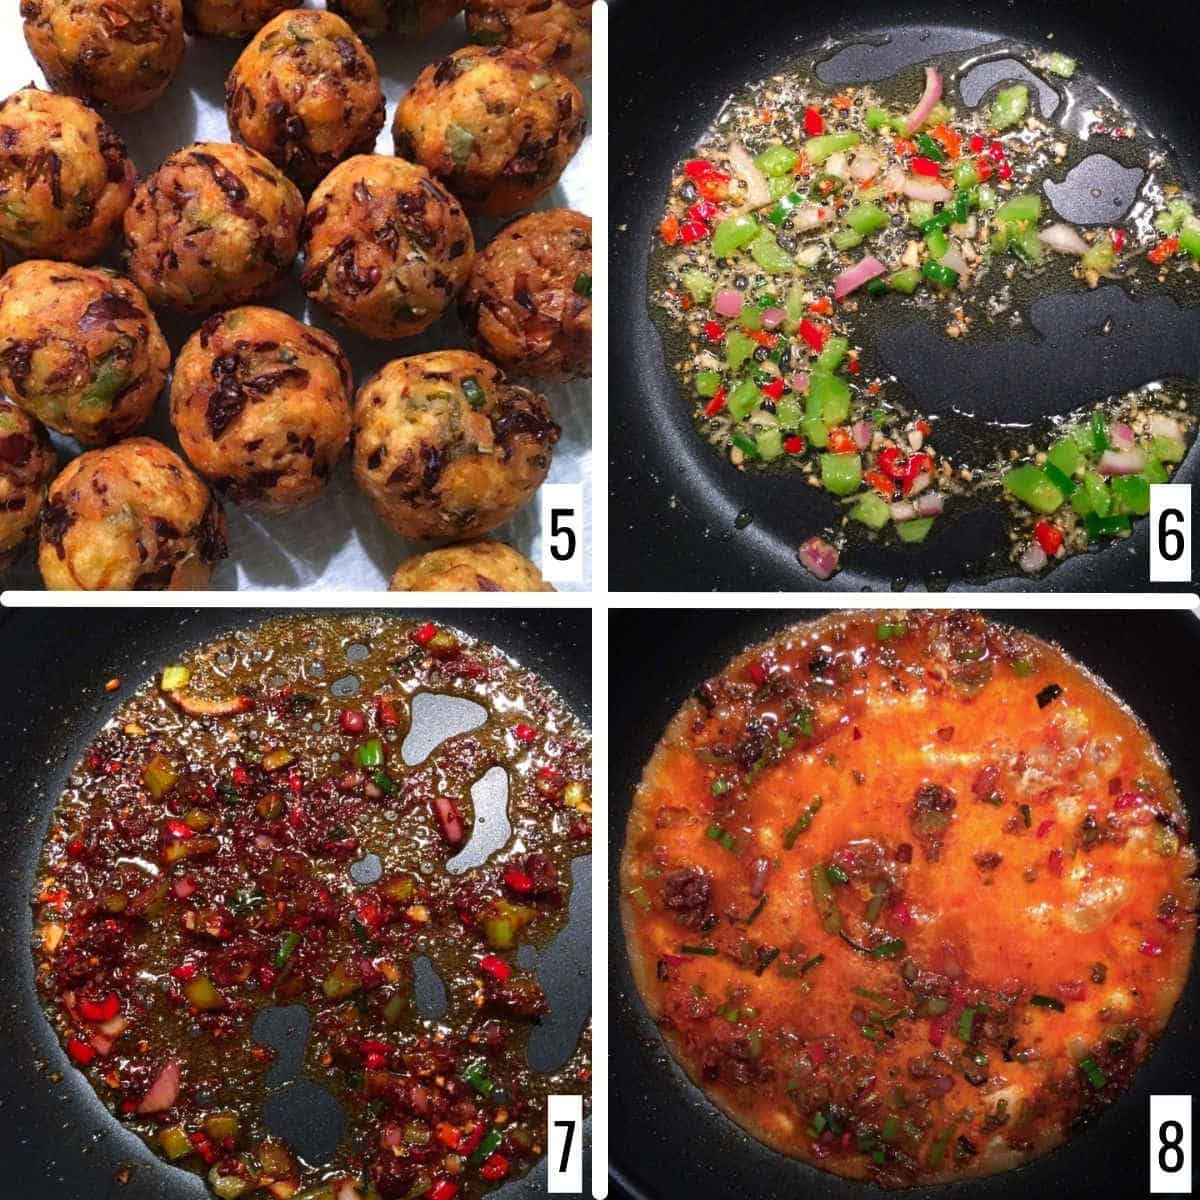 A 4-step collage showing the deep fried vegetable balls and making of the sauce.